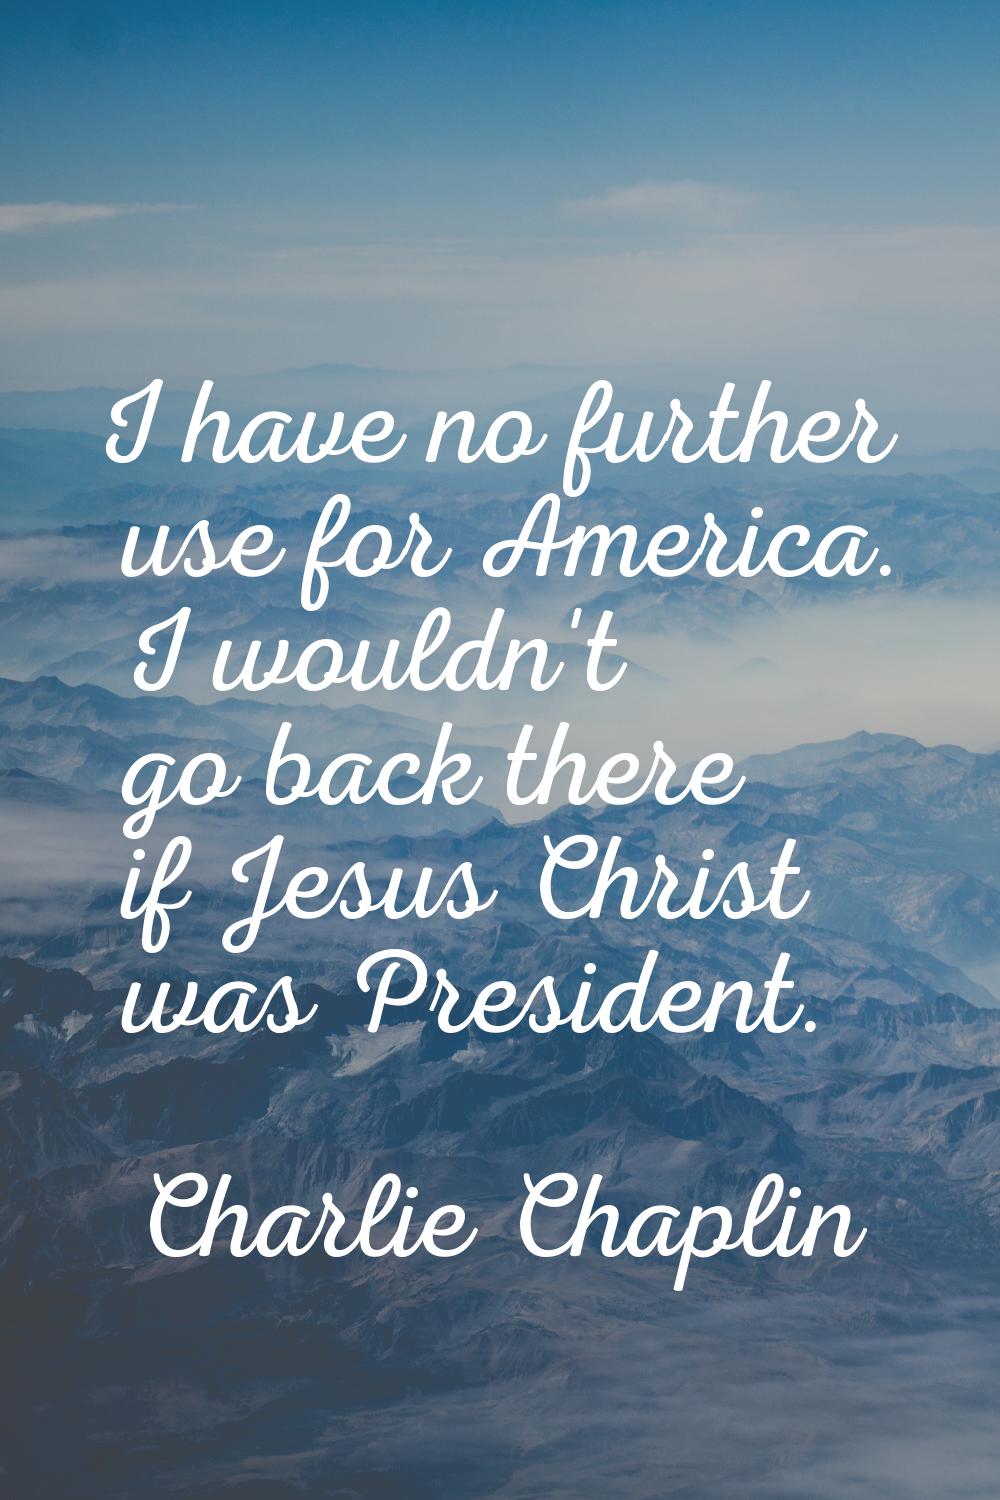 I have no further use for America. I wouldn't go back there if Jesus Christ was President.